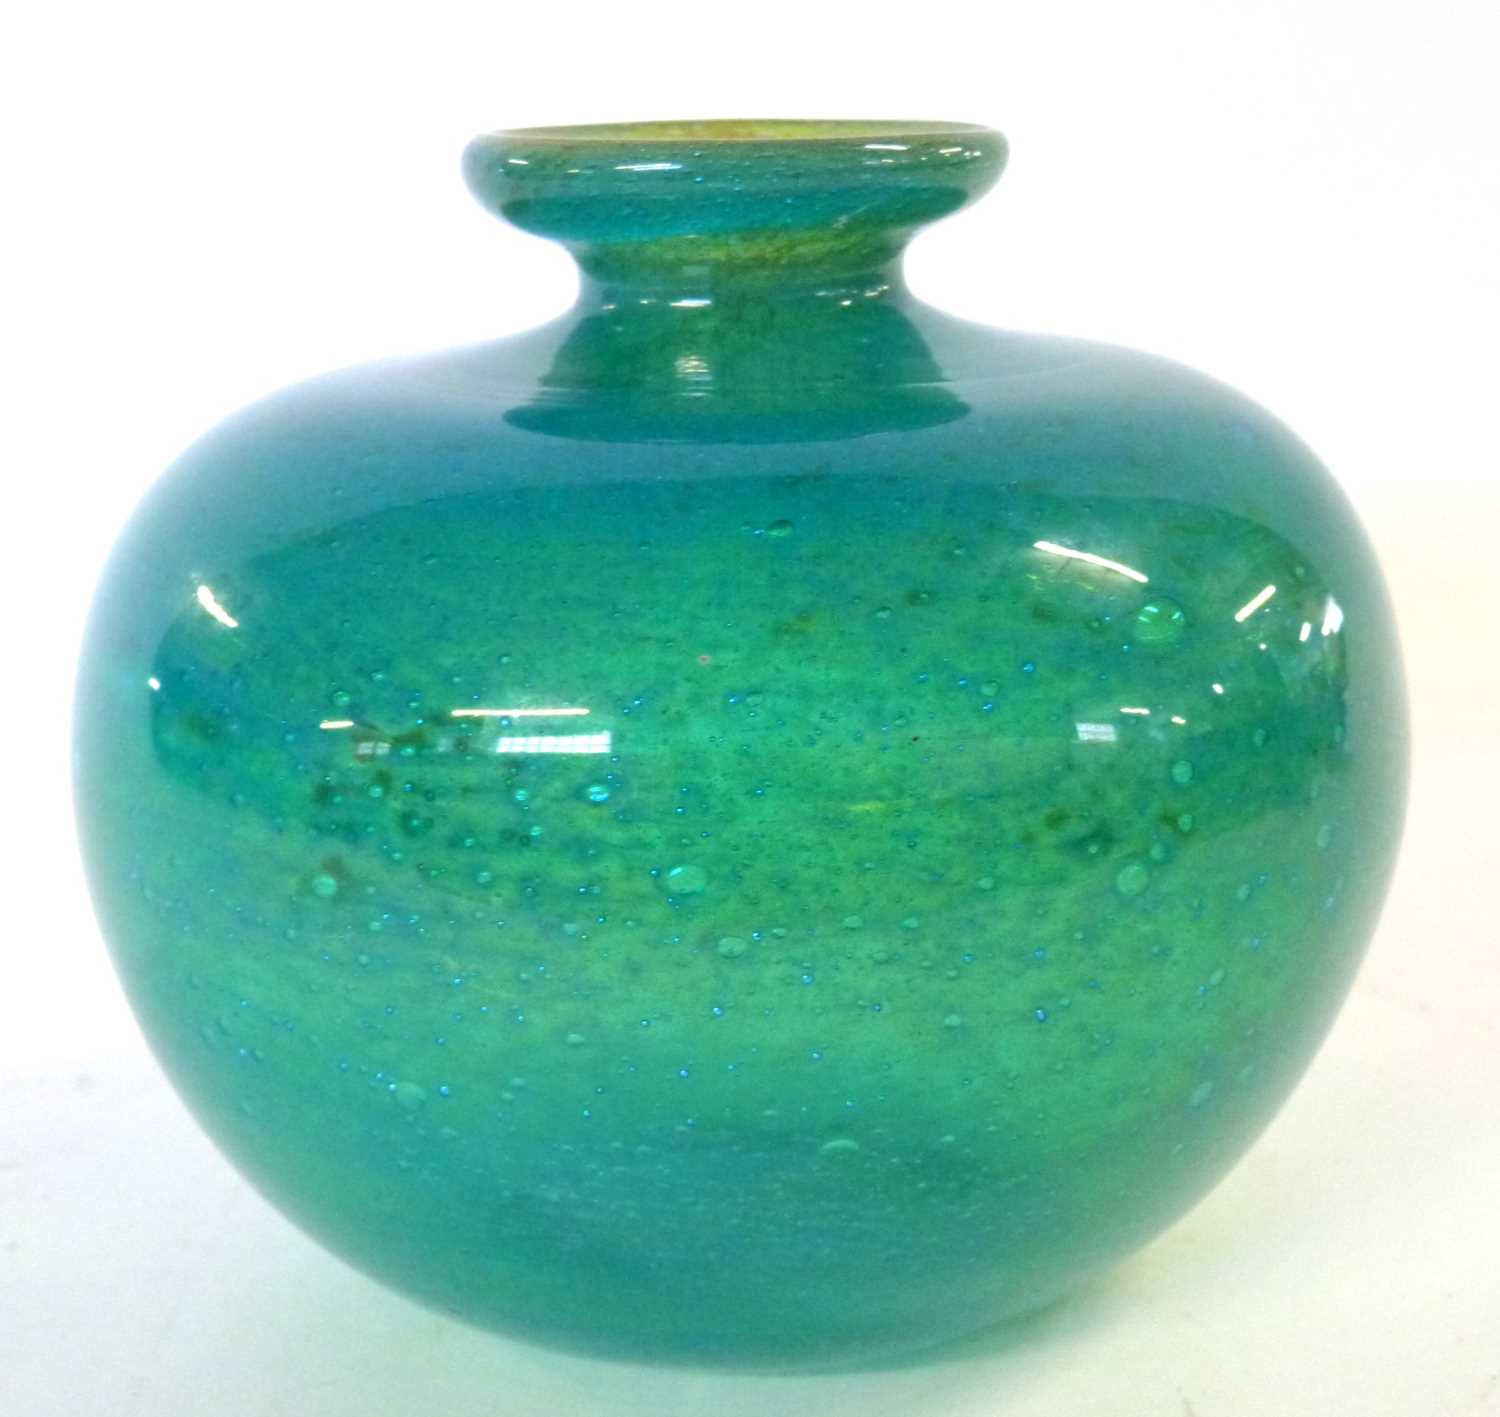 A very rare early Mdina Glass spherical vase with blue/green bubbled exterior and sandy coloured